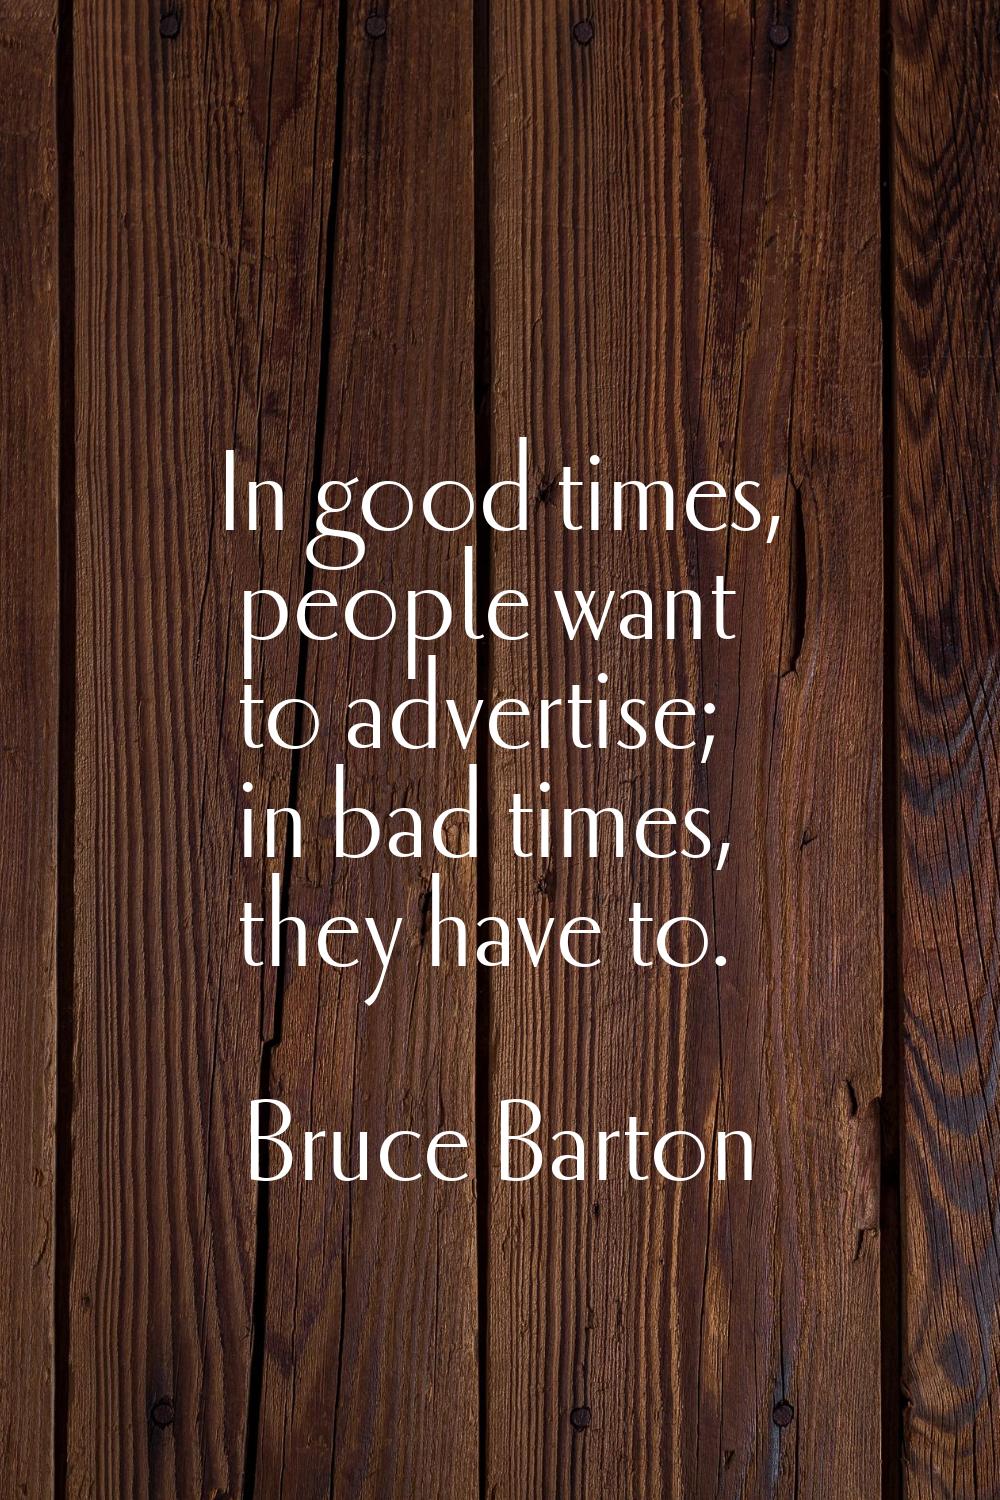 In good times, people want to advertise; in bad times, they have to.